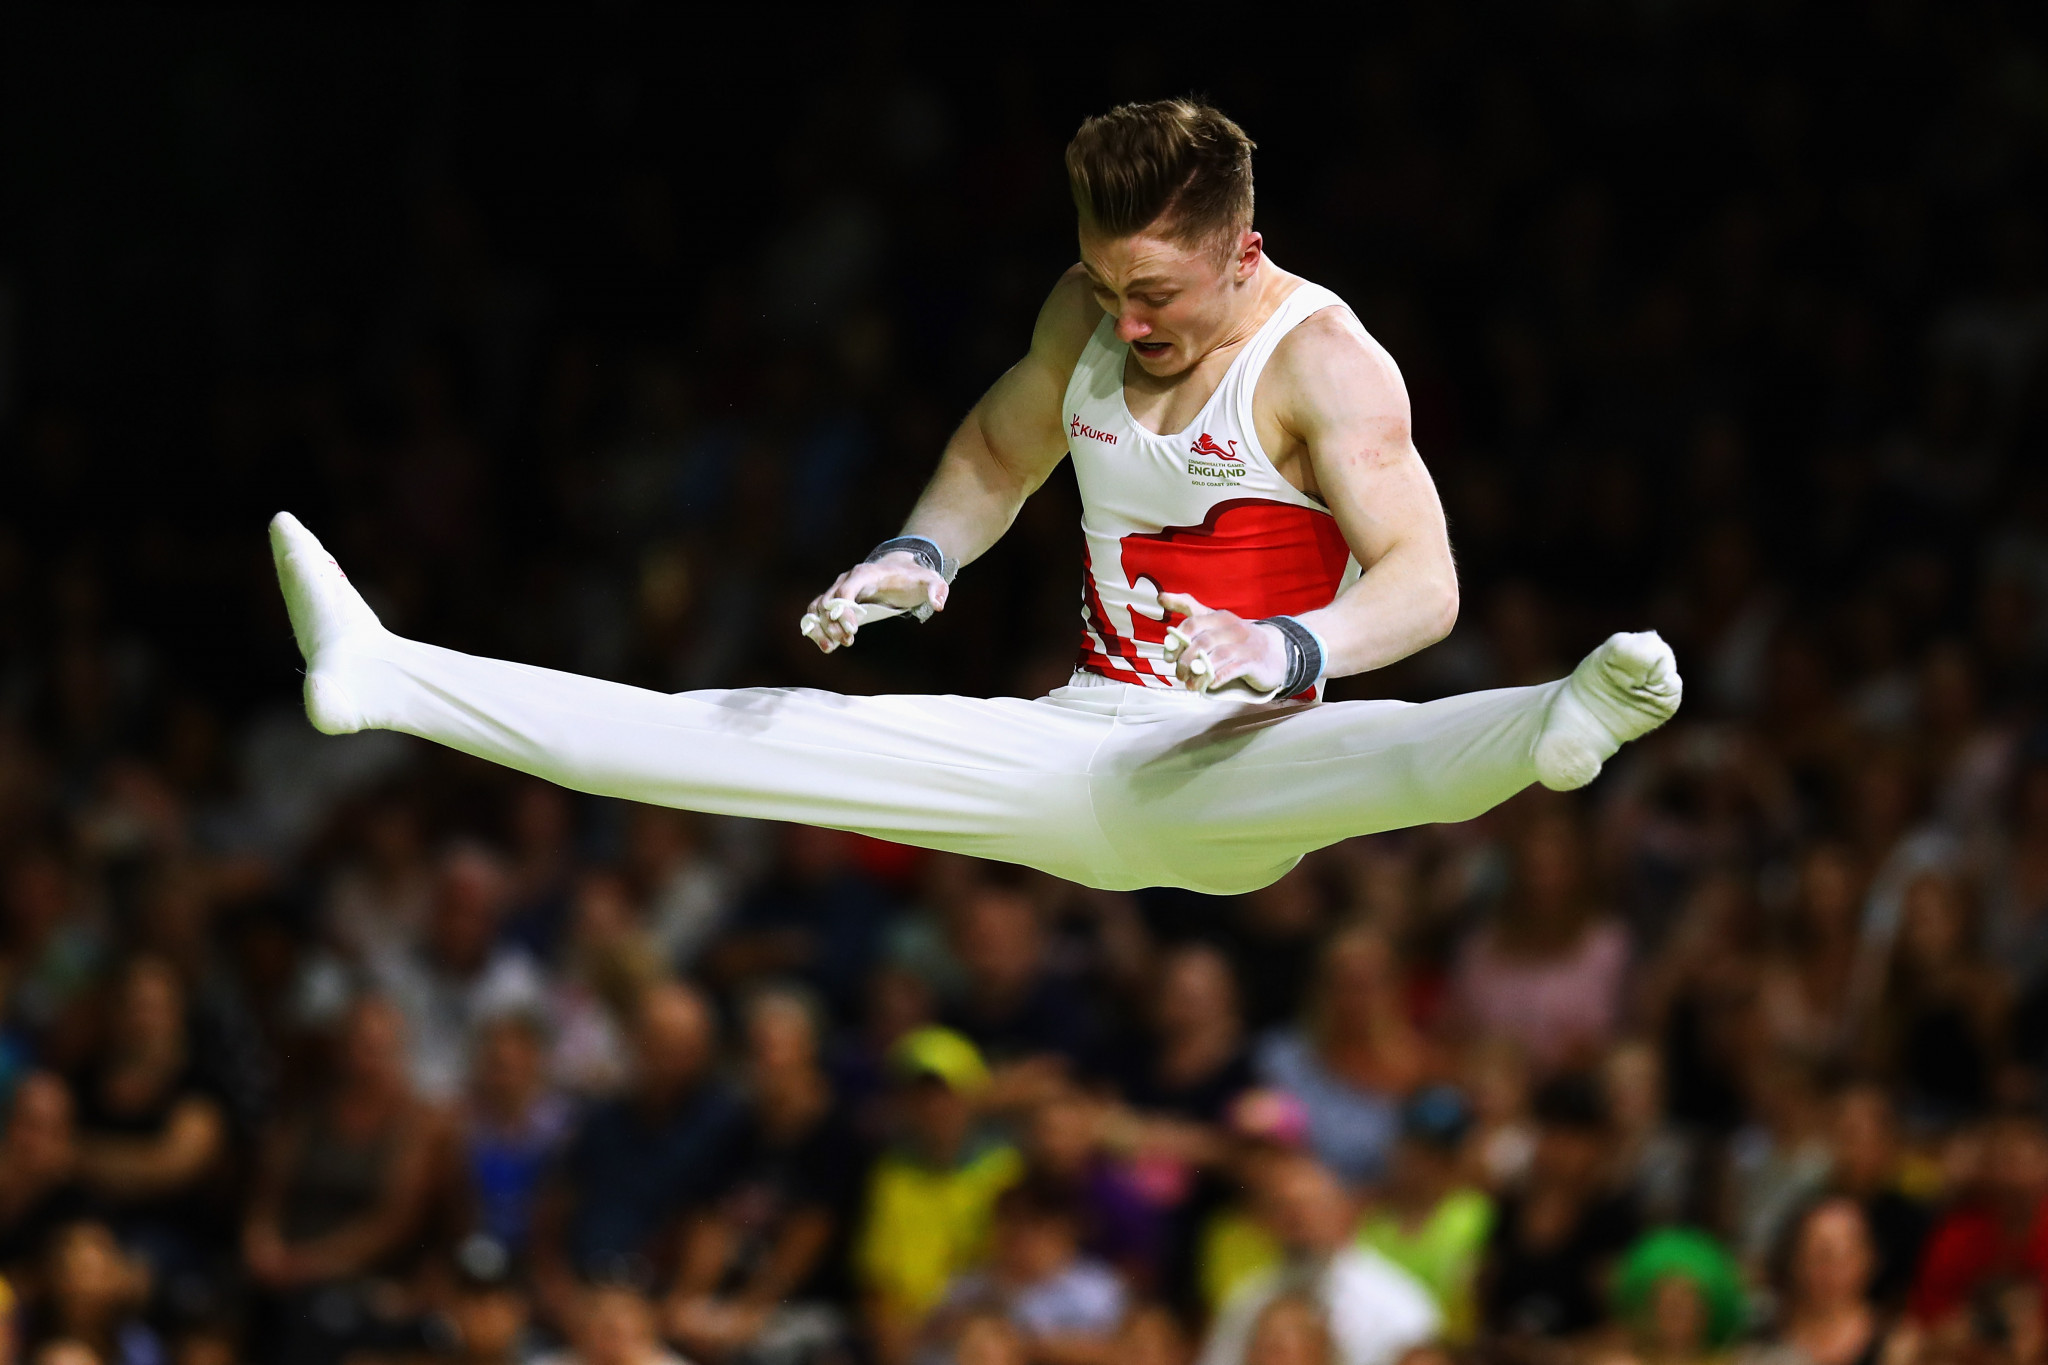 Nile Wilson has claimed there is a "culture of abuse" at British Gymnastics ©Getty Images